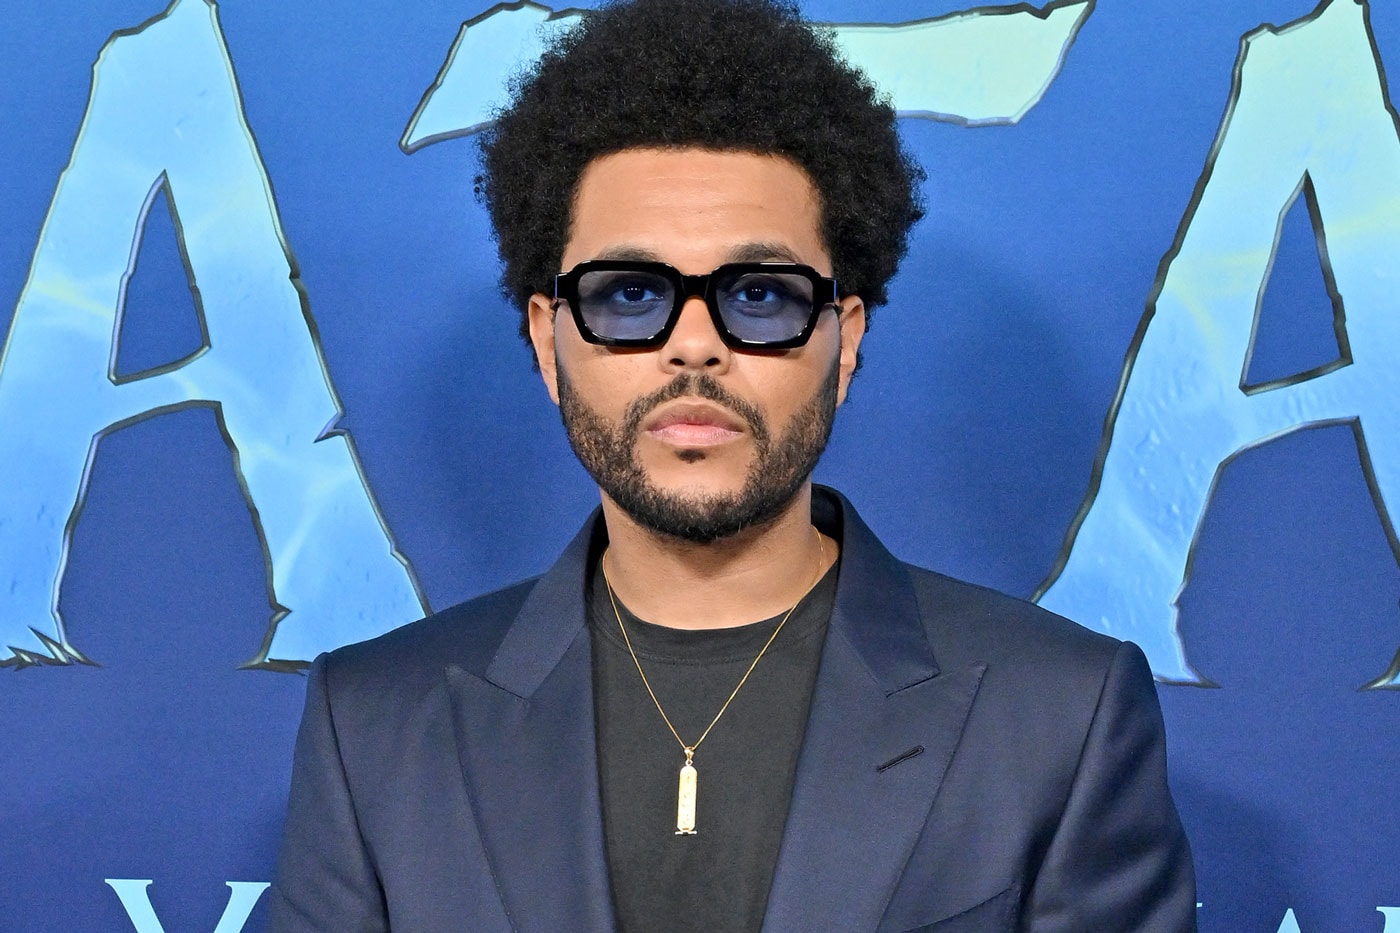 Watch The Weeknd's Performance at The Victoria's Secret Fashion Show